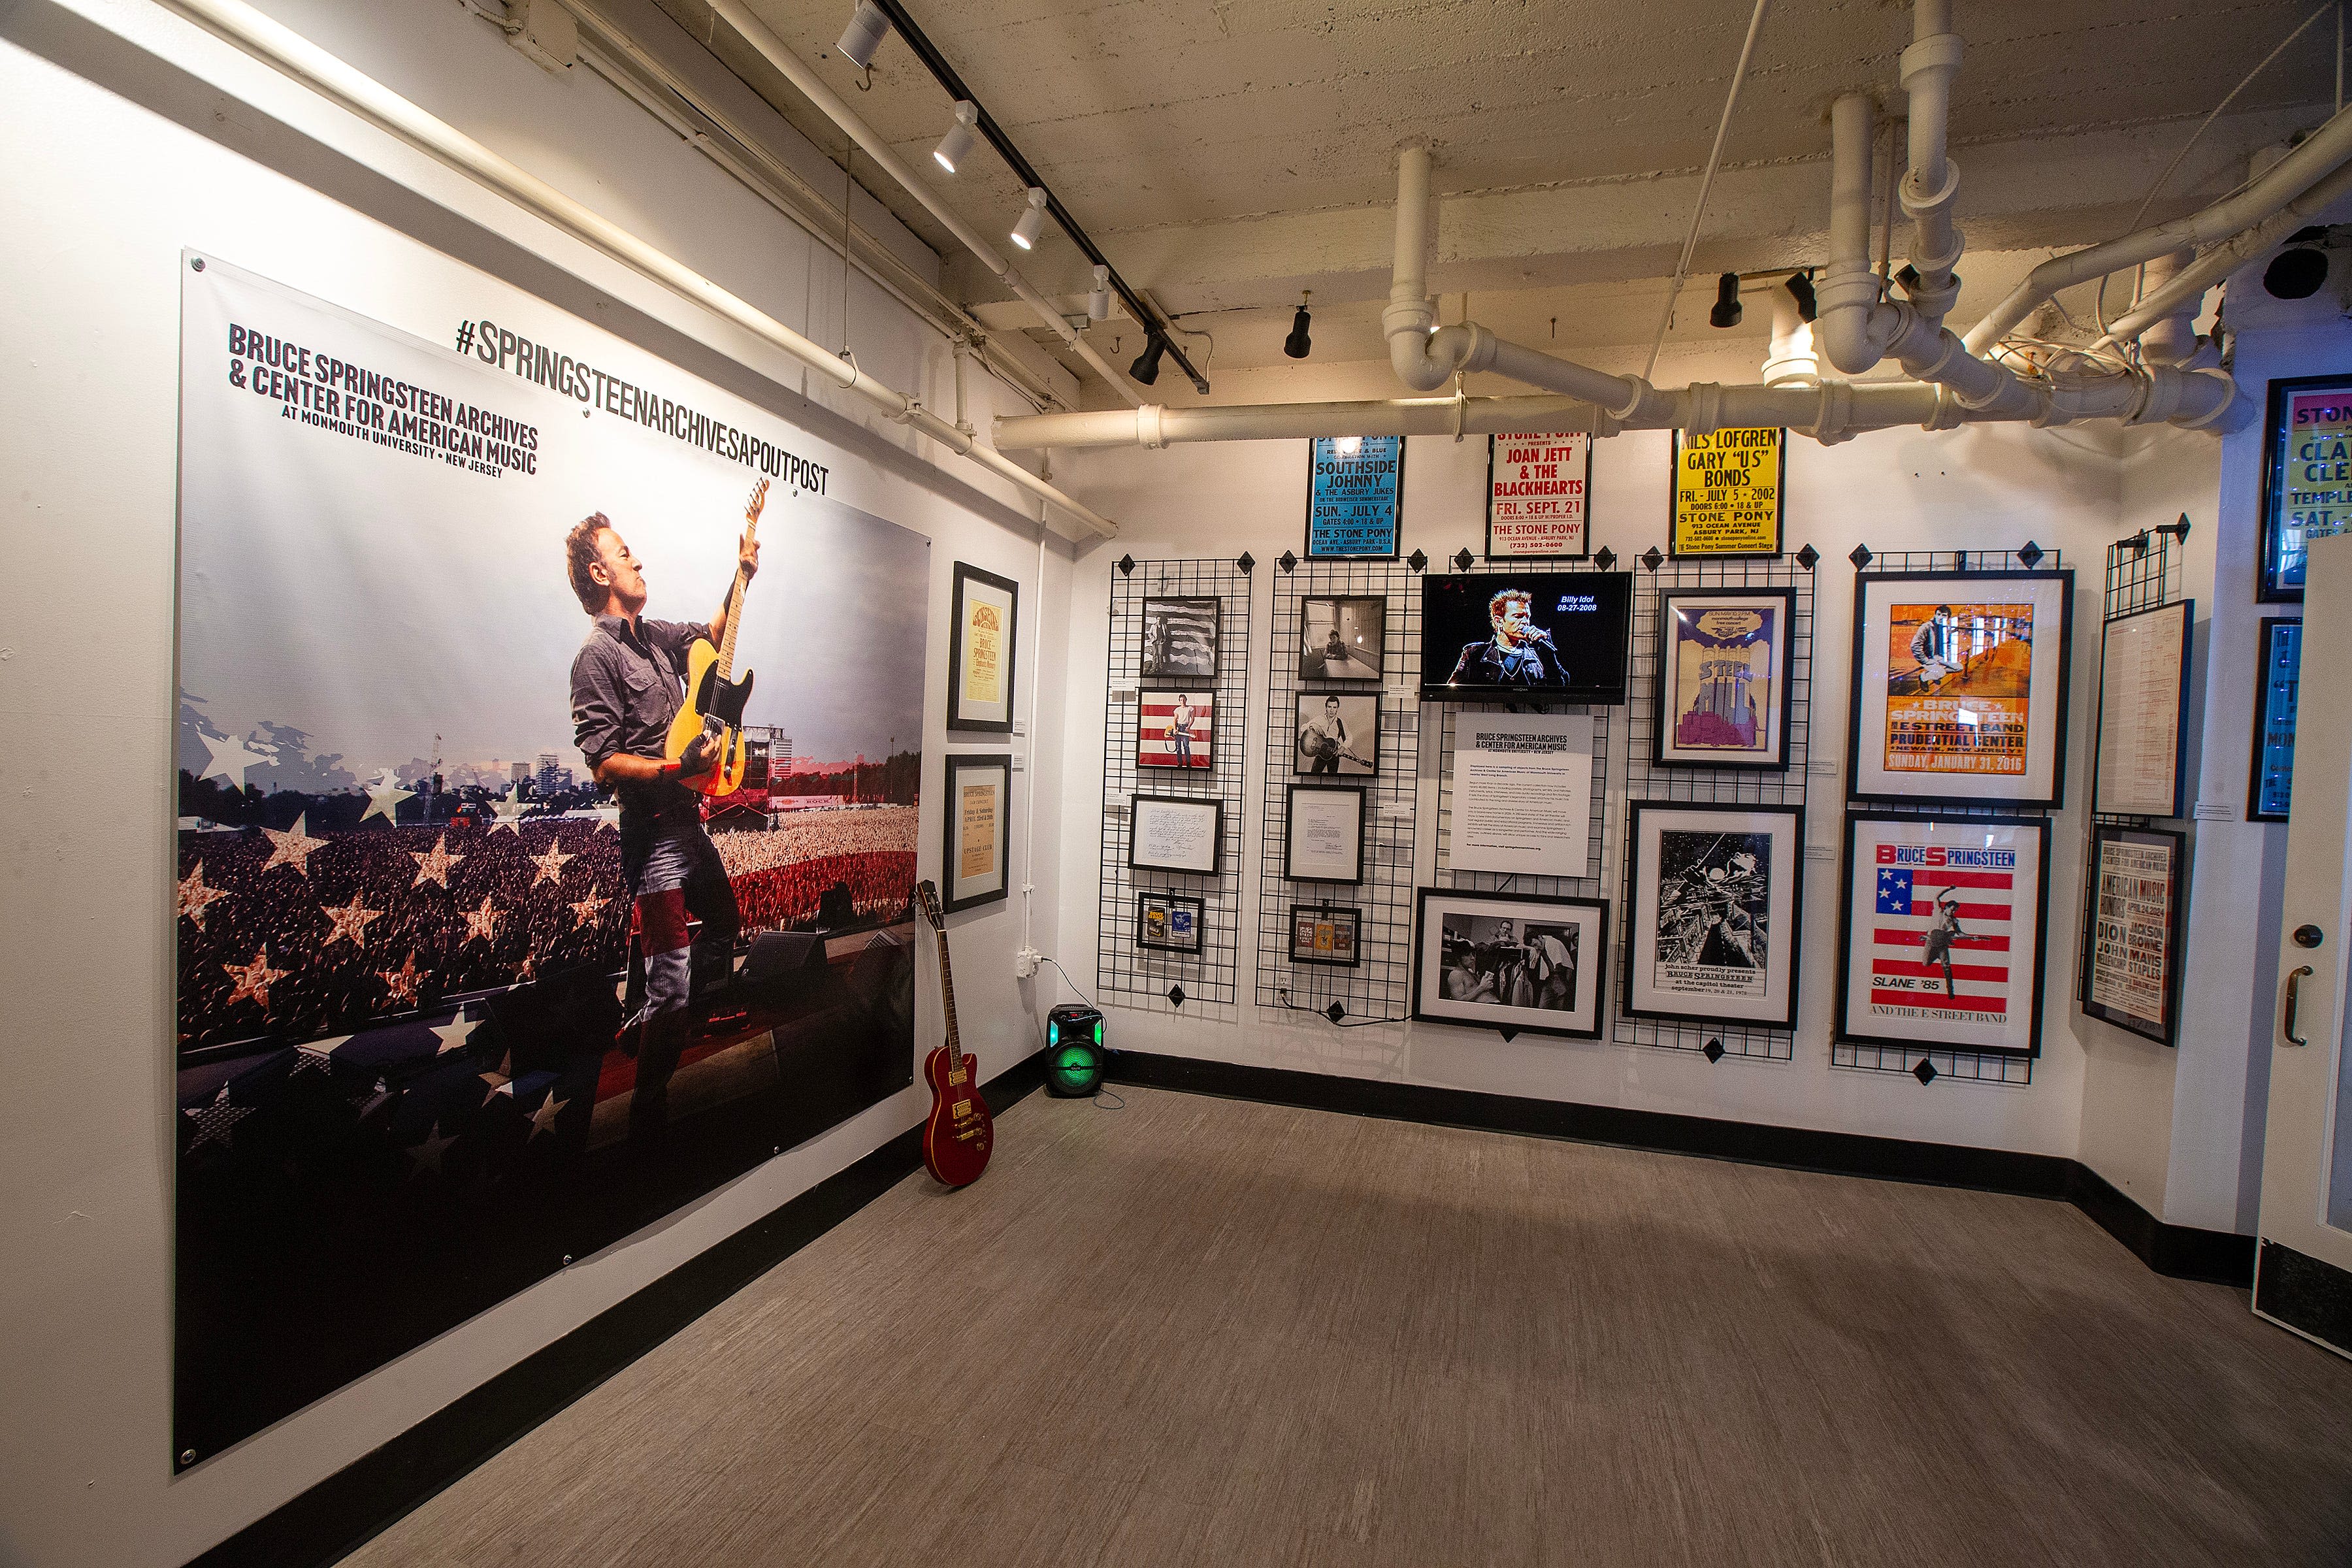 Bruce Springsteen Archives Outpost is the new must-see spot for Boss fans in Asbury Park